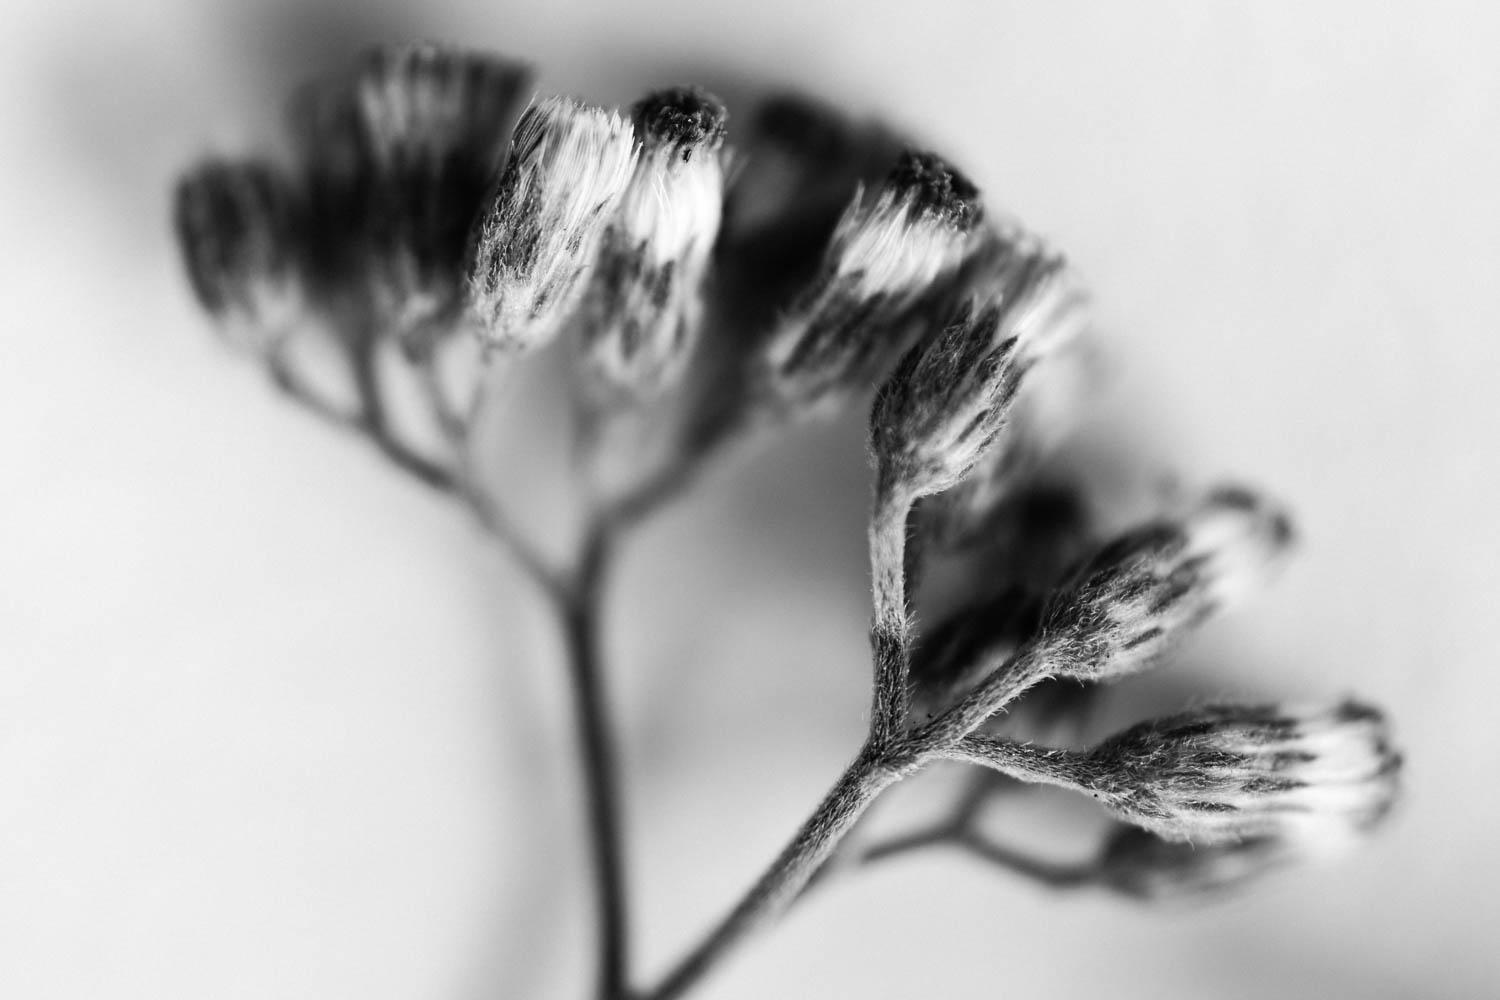 Black and white still life flowers photo.